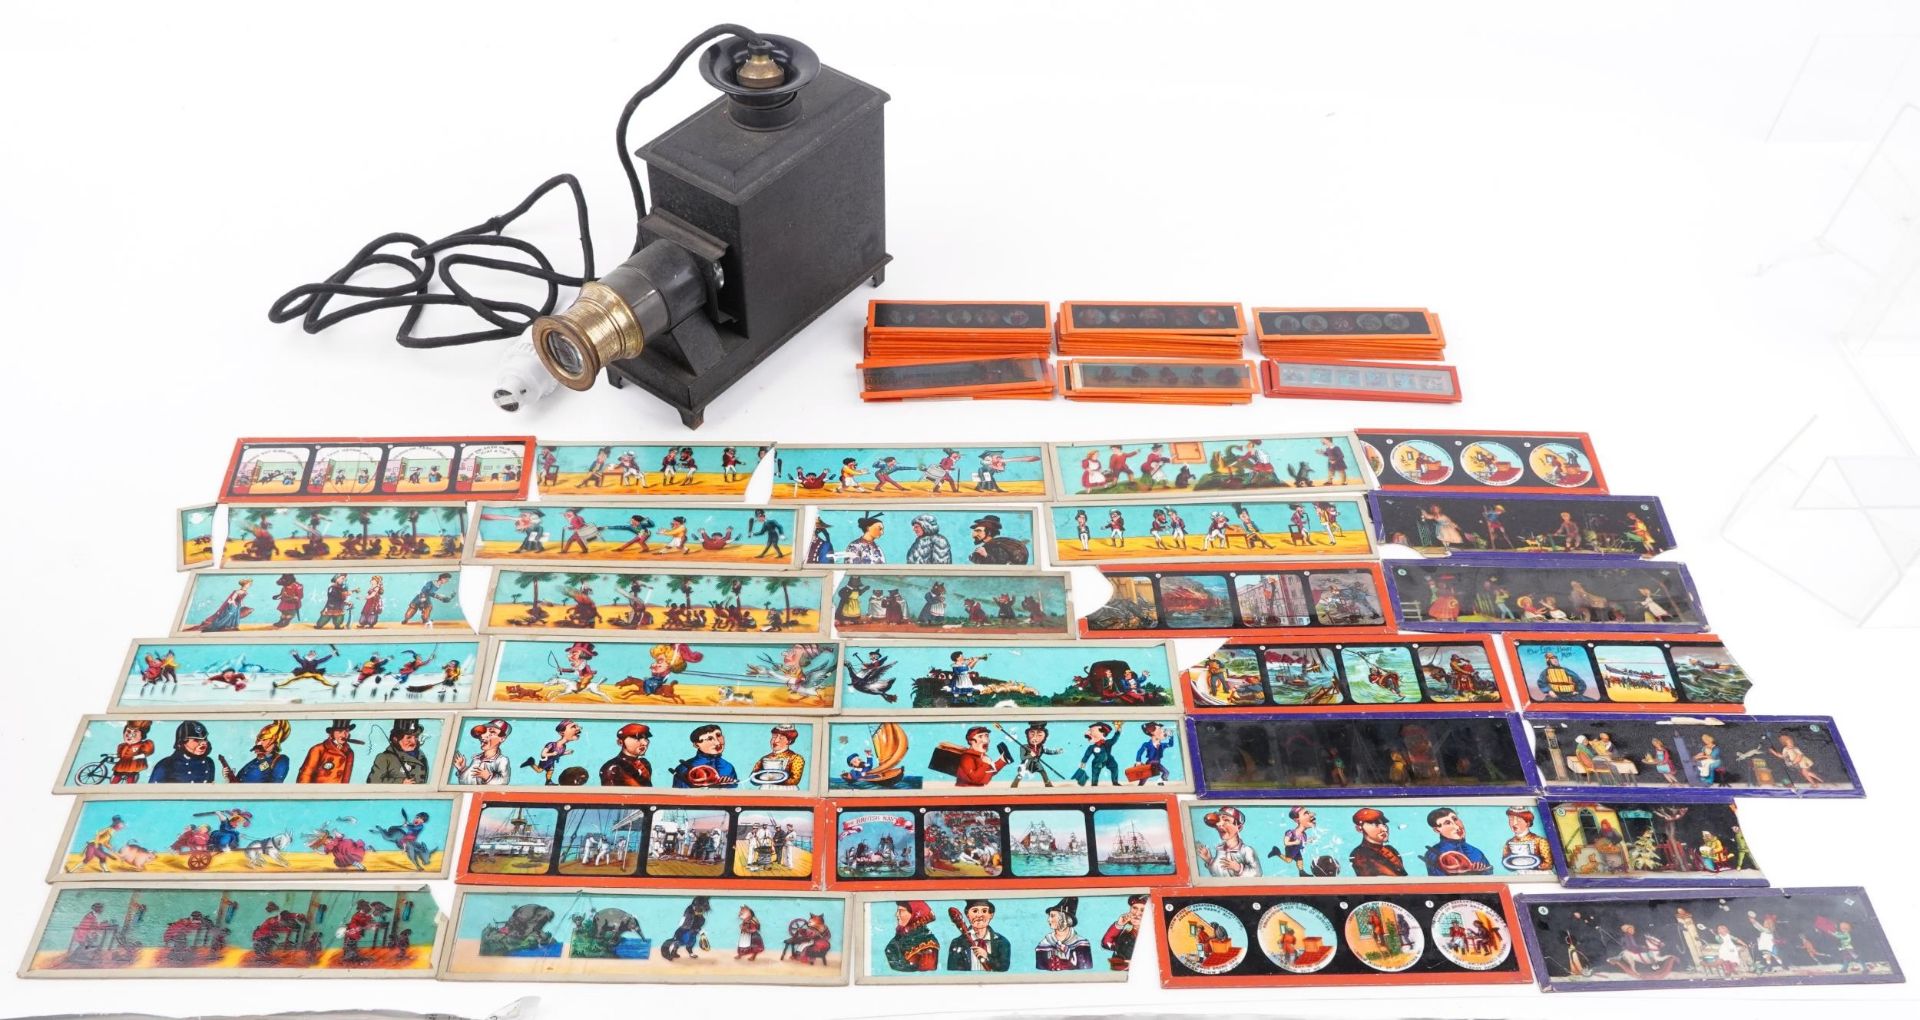 Vintage magic lantern with a collection of coloured magic lantern slides, some with boxes : For